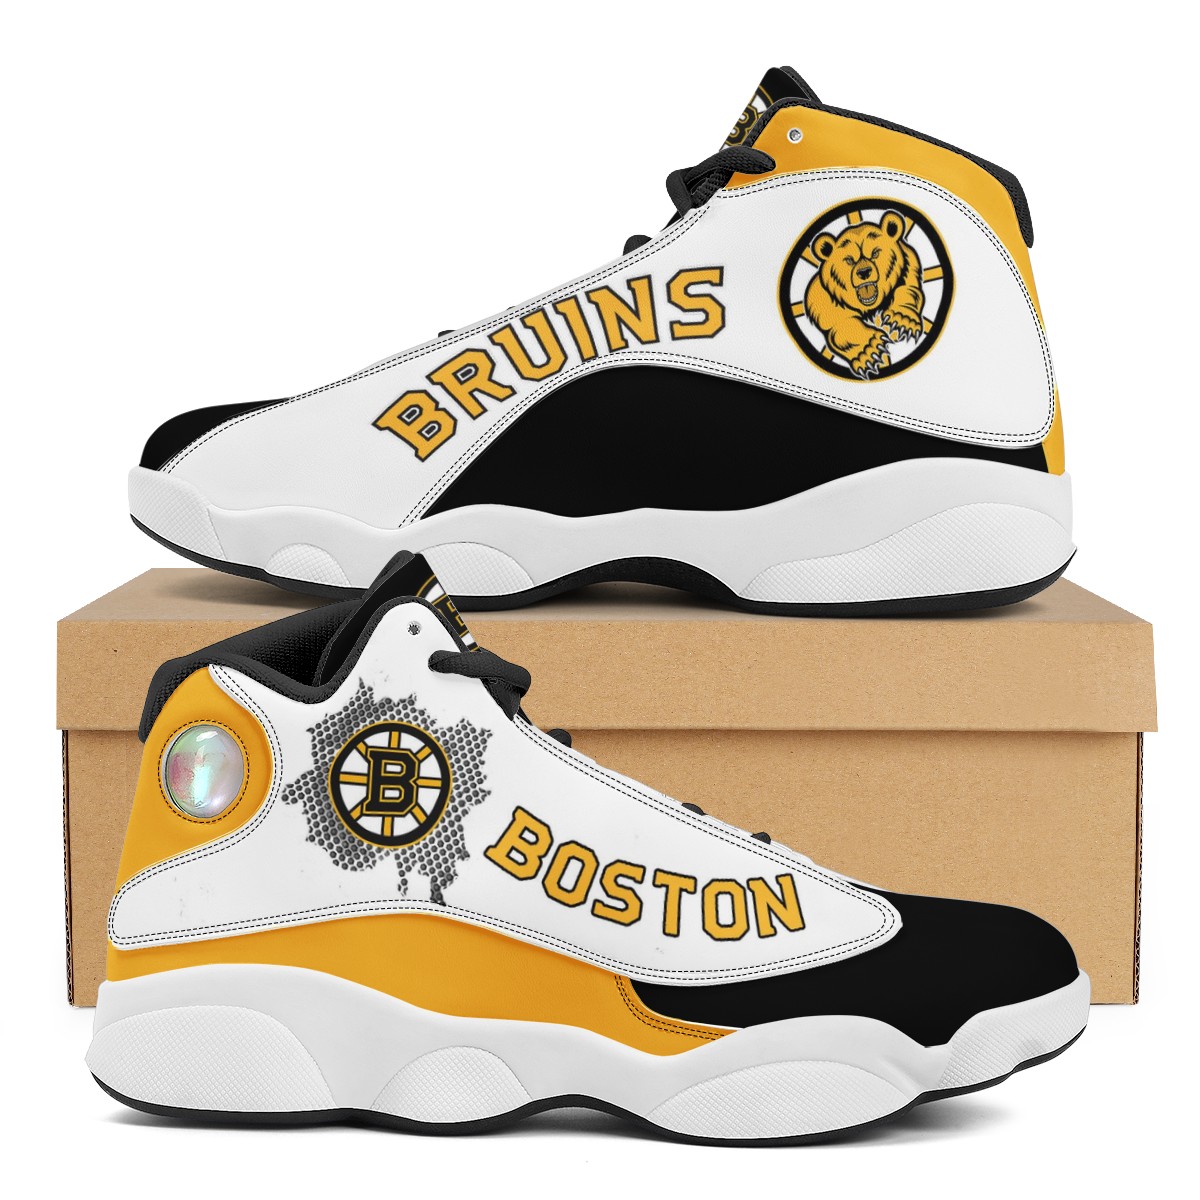 Men's Boston Bruins Limited Edition JD13 Sneakers 001